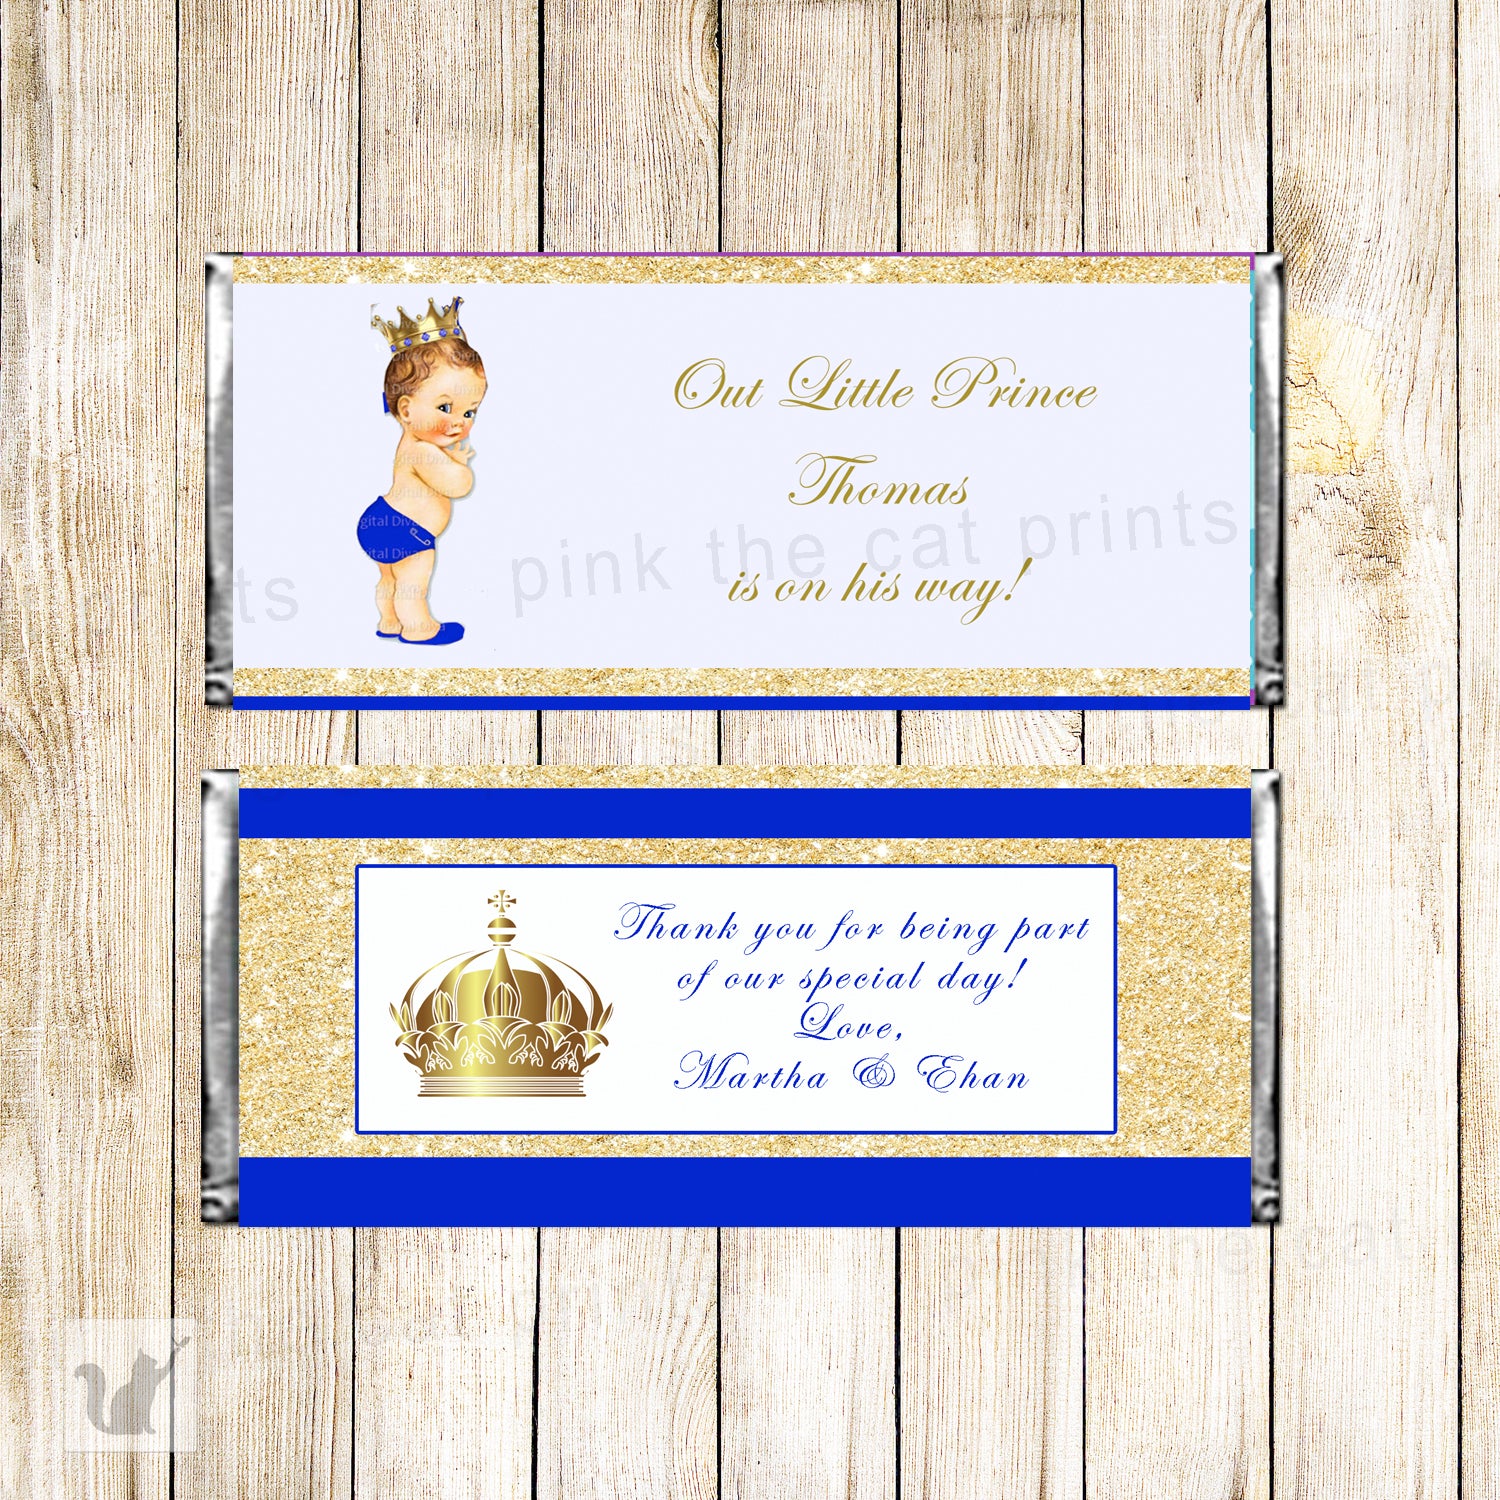 Candy bar wrappers prince vintage baby shower printable instant download